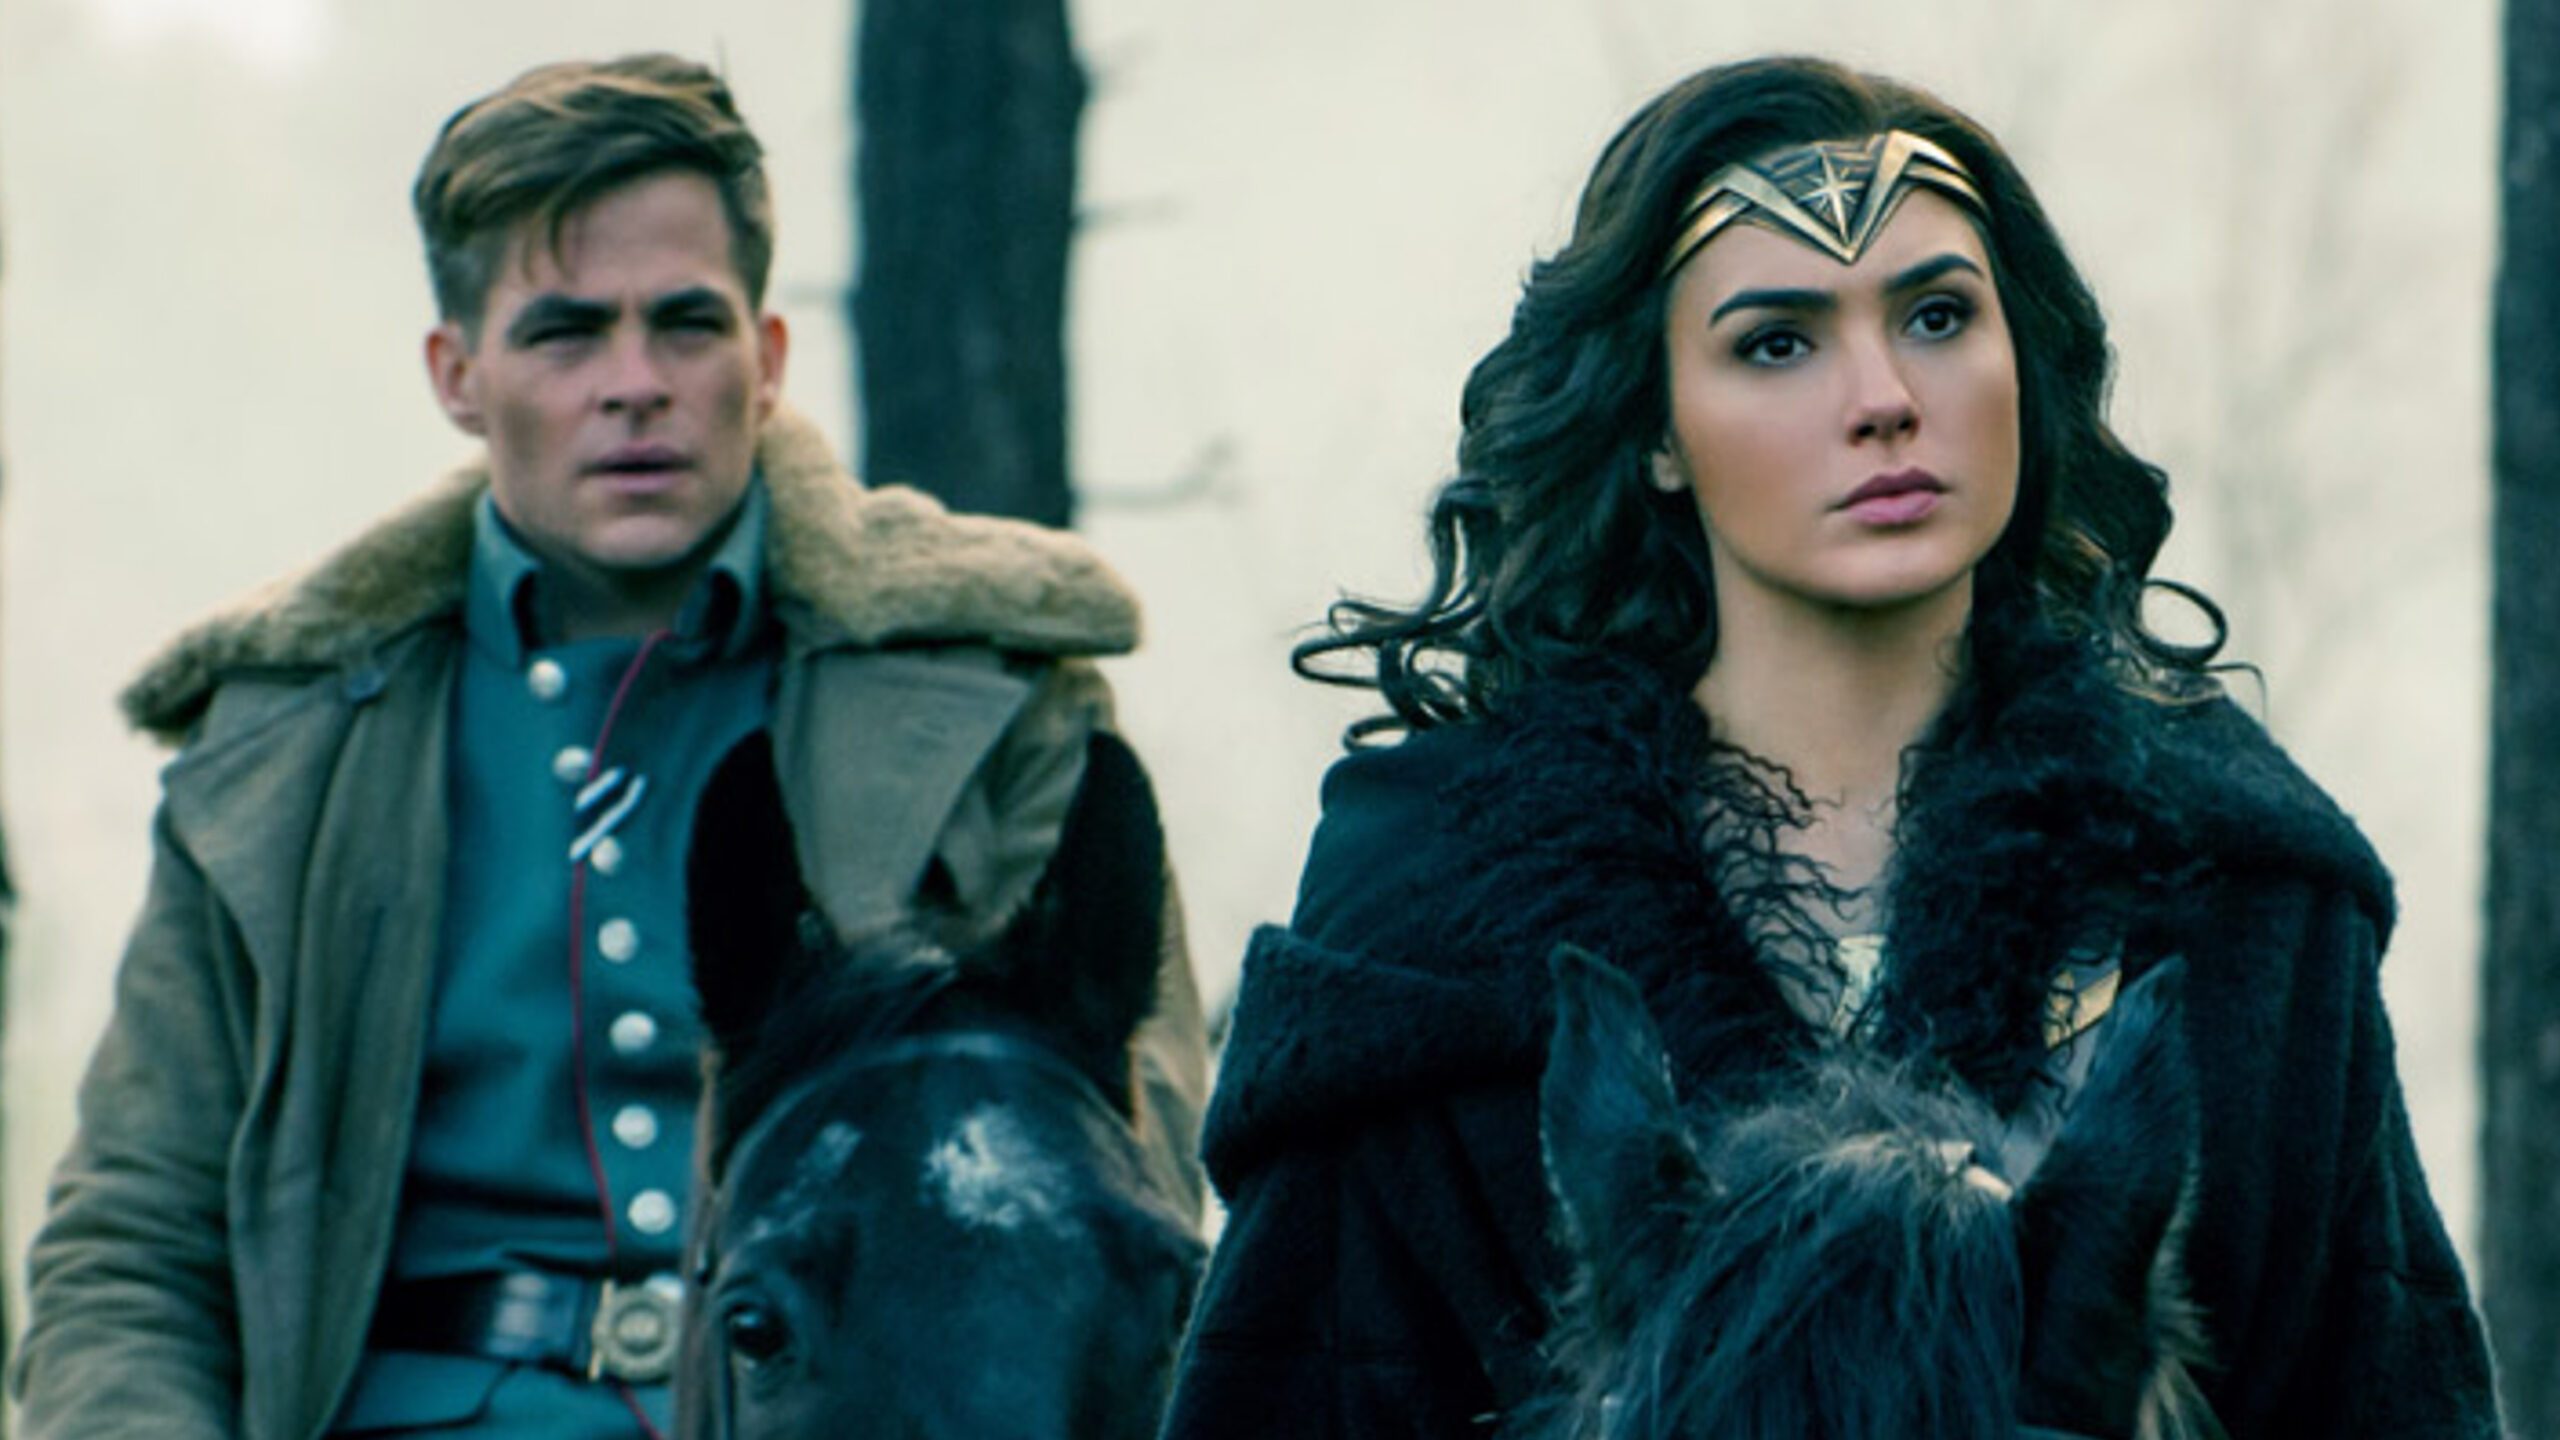 ‘Wonder Woman’ review: Full of verve and wonder